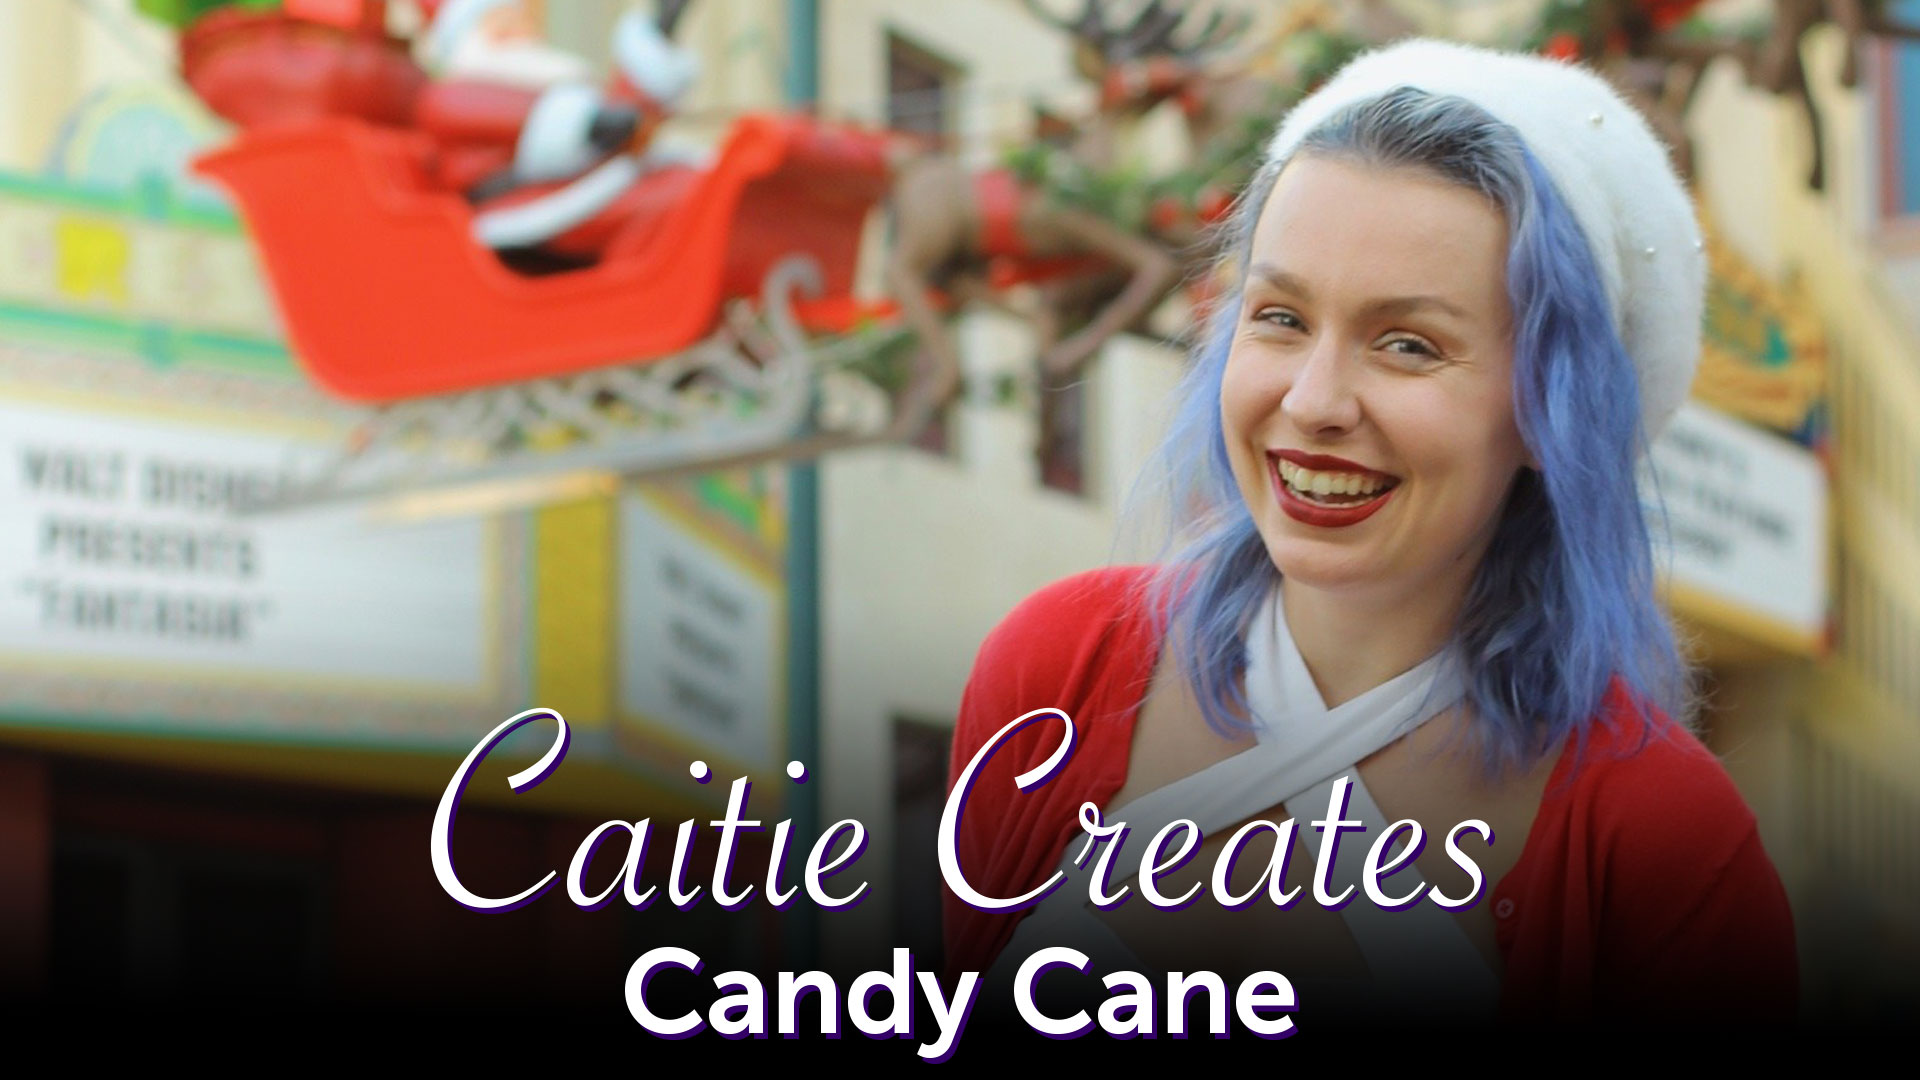 Candy Cane Inspired Vintage – Caitie Creates